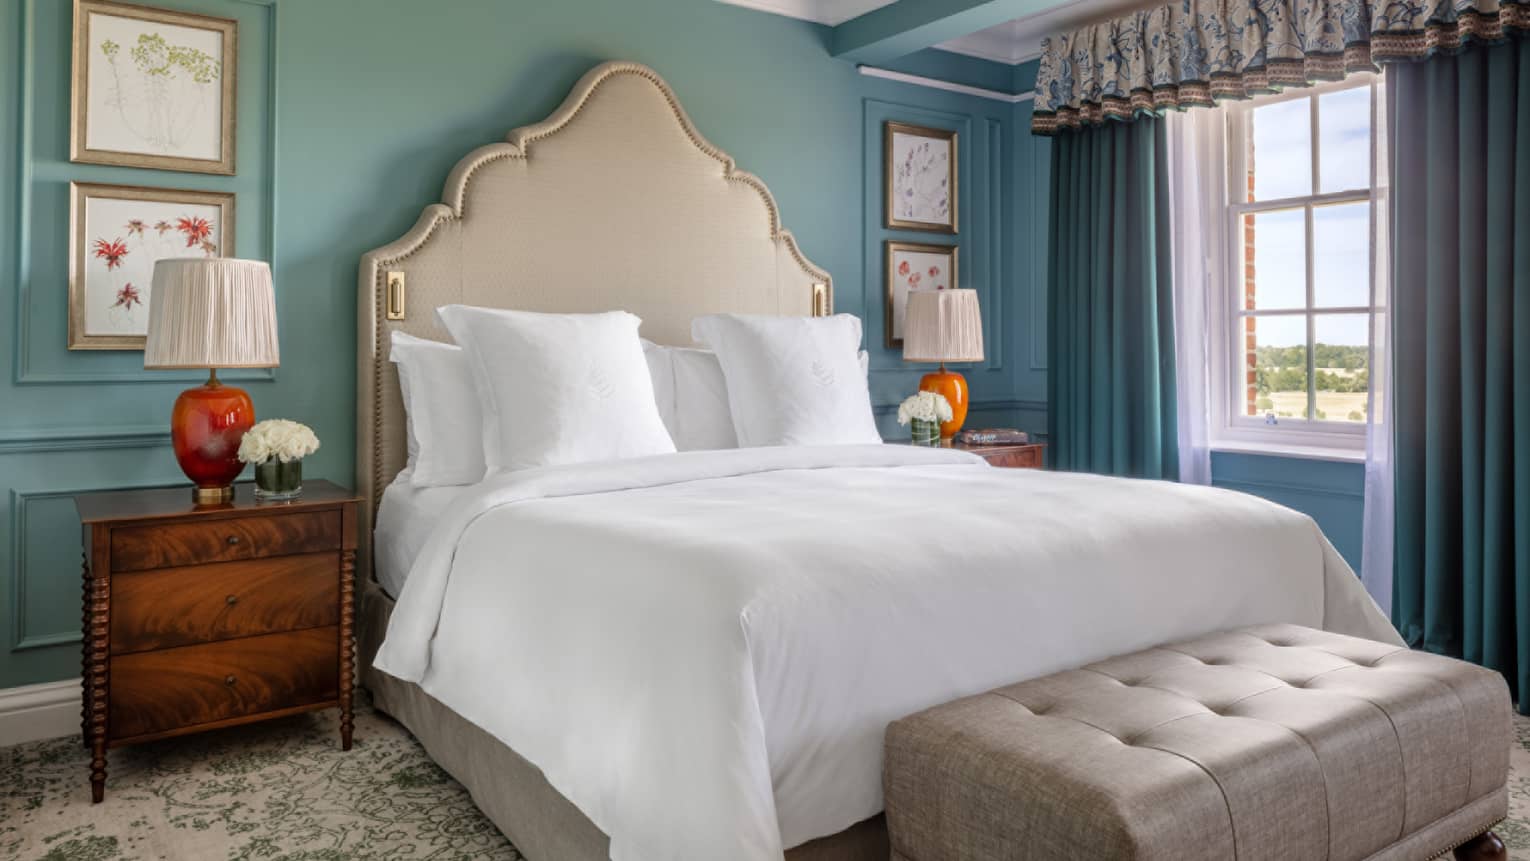 Guest room with Queen bed, cream headboard, cherry bed side table, window with blue drapes